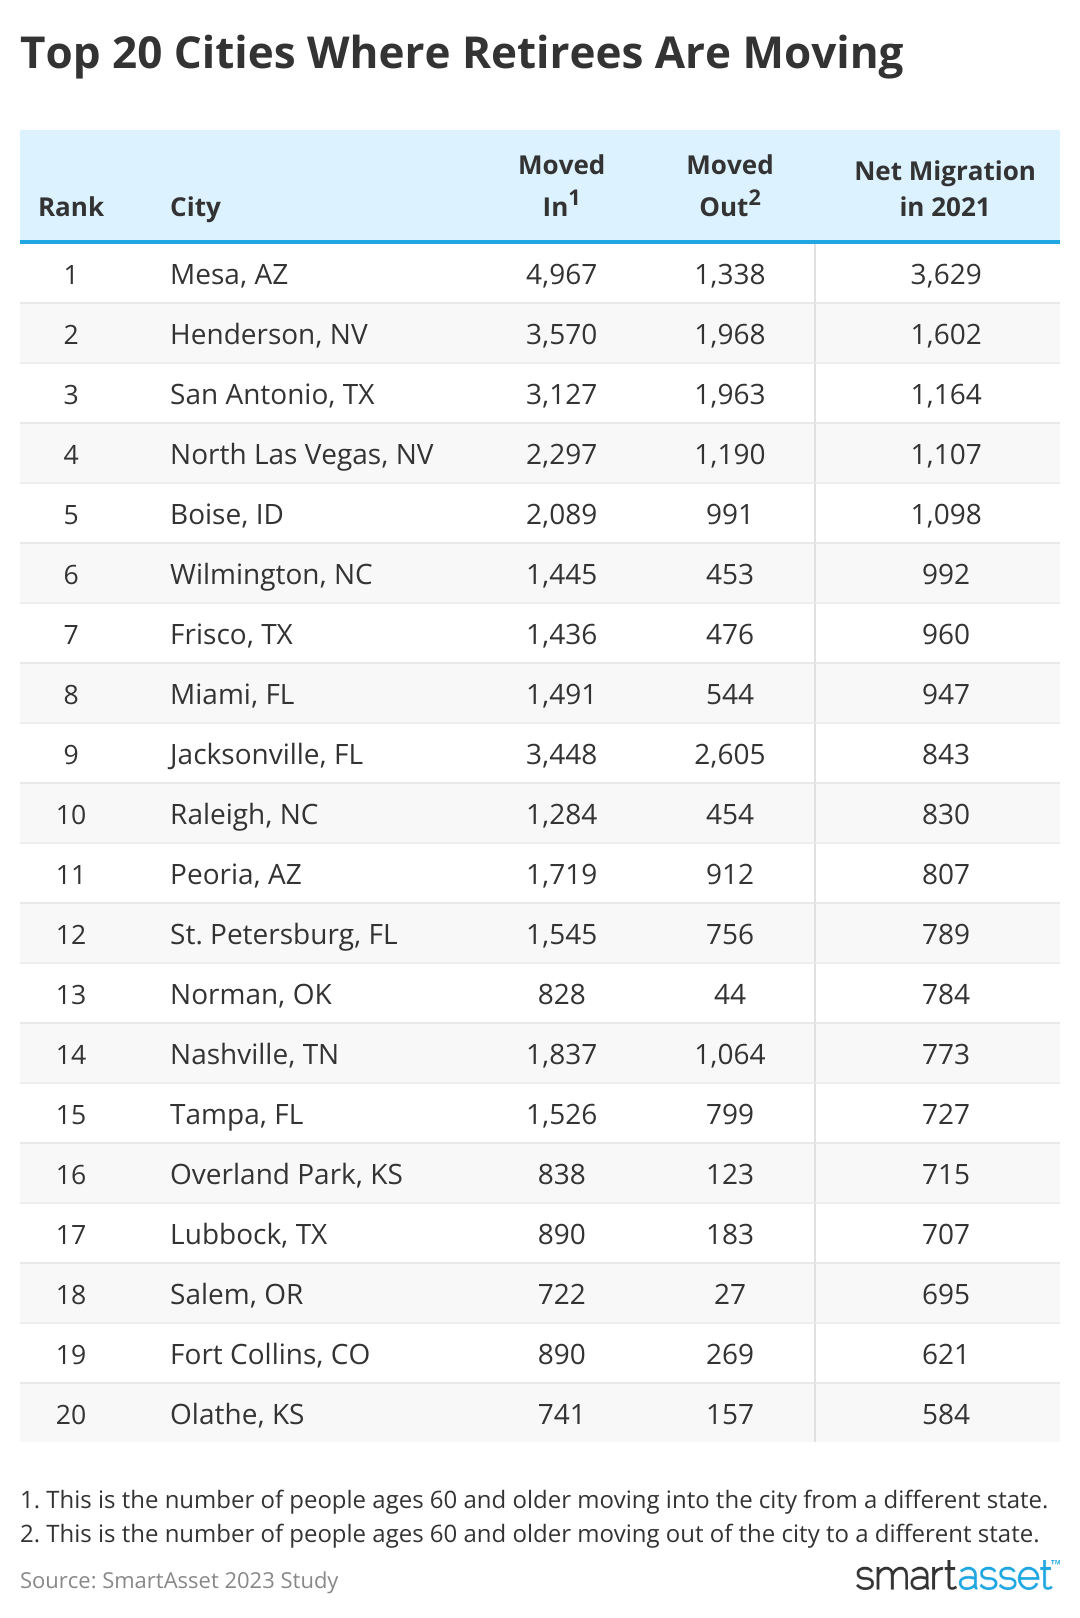 Table showing the top 20 cities where retirees are moving.